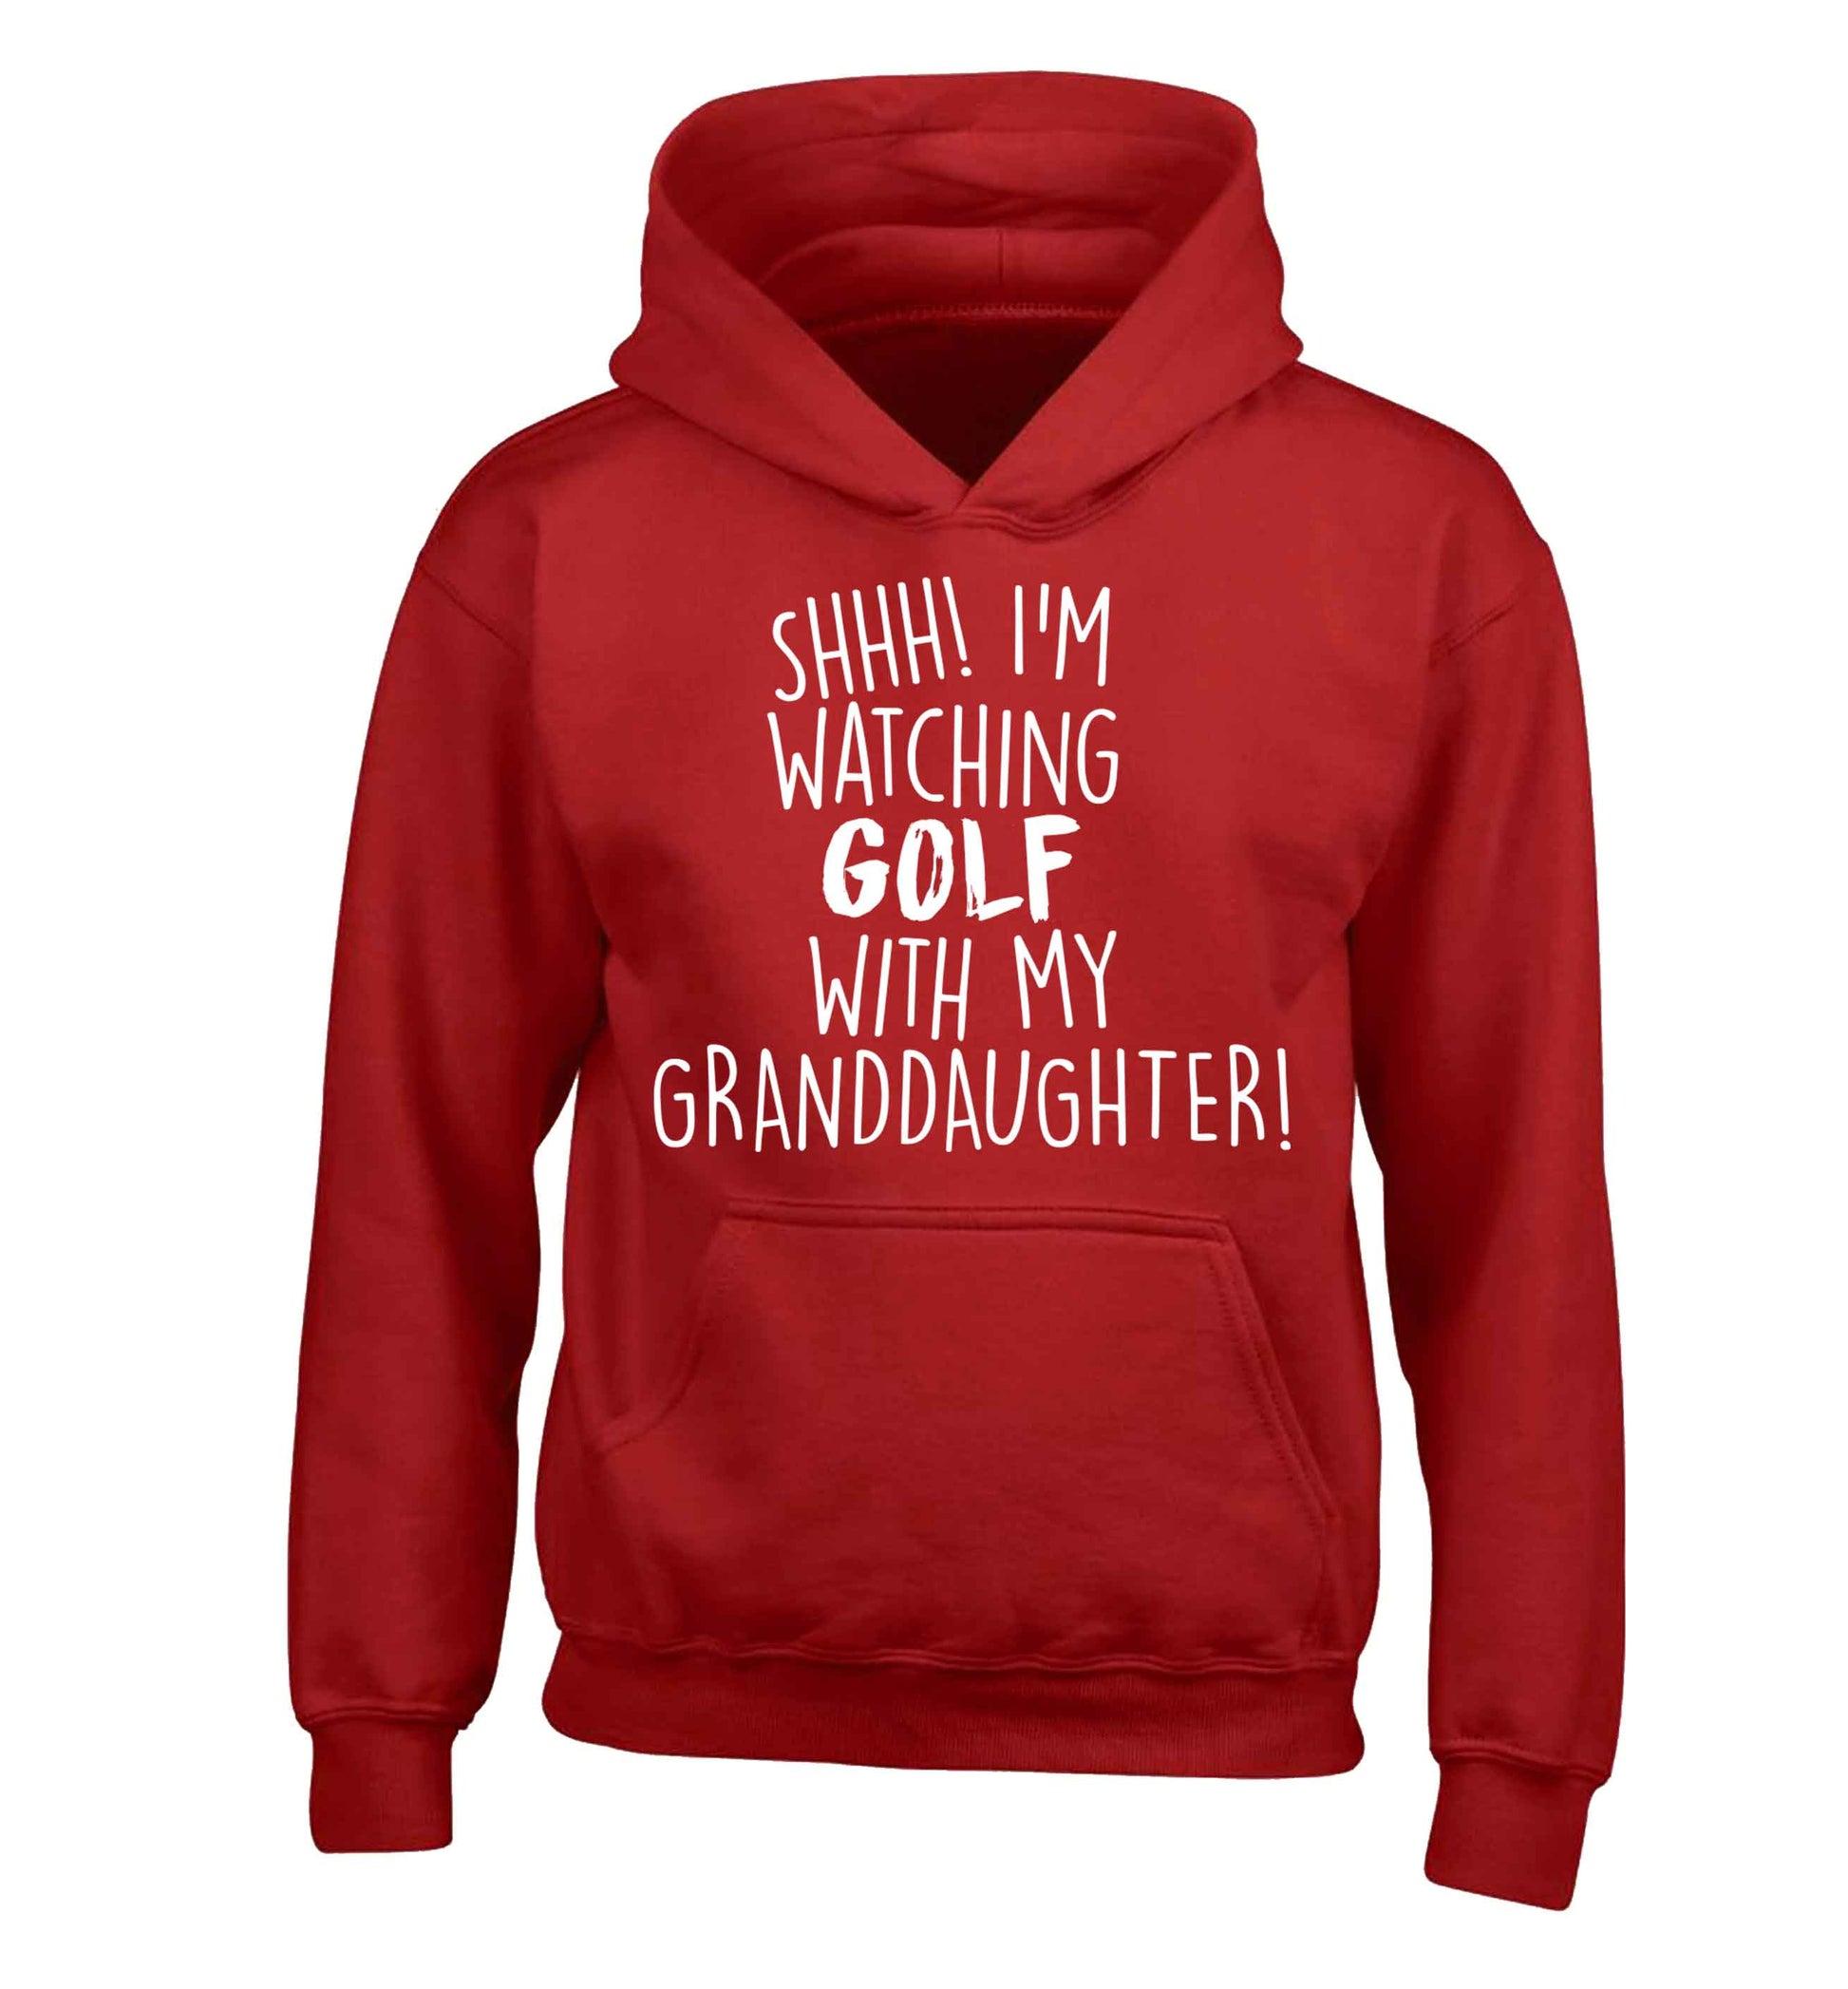 Shh I'm watching golf with my granddaughter children's red hoodie 12-13 Years